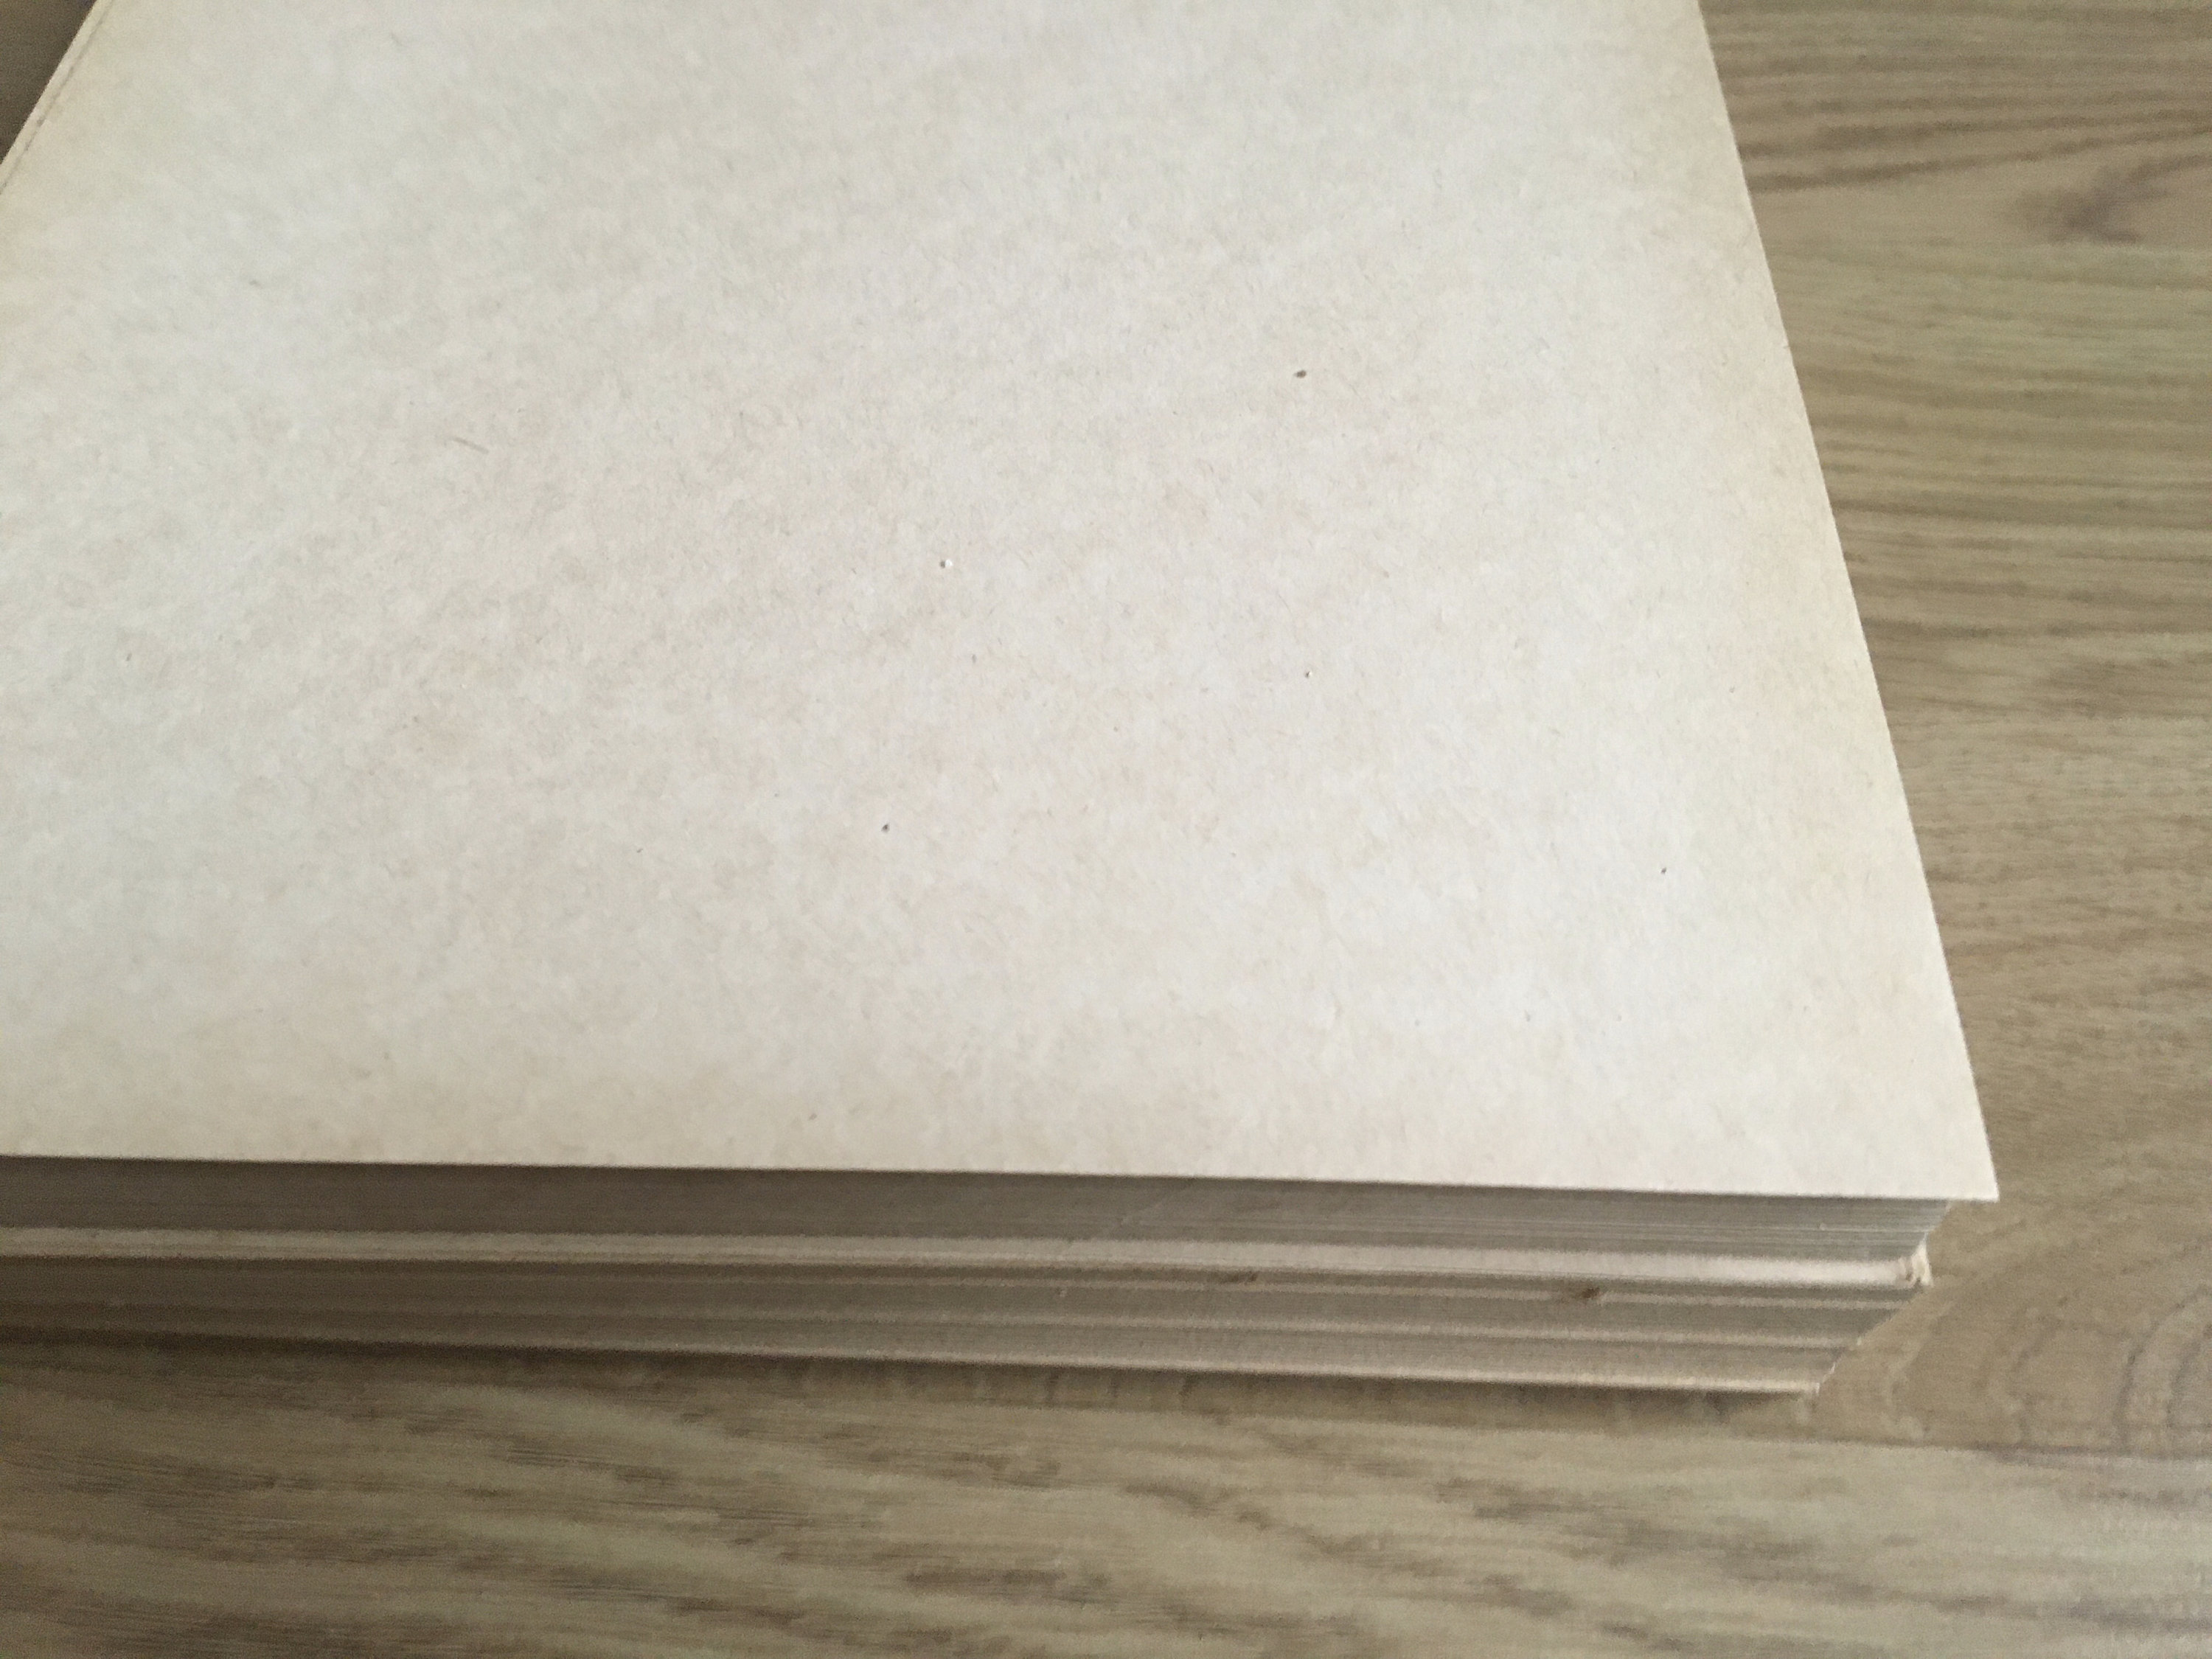 PARCHMENT SILICONE TISSUE Protective Paper for Heat Transfer Applications  8.5x11 250 Sheets 